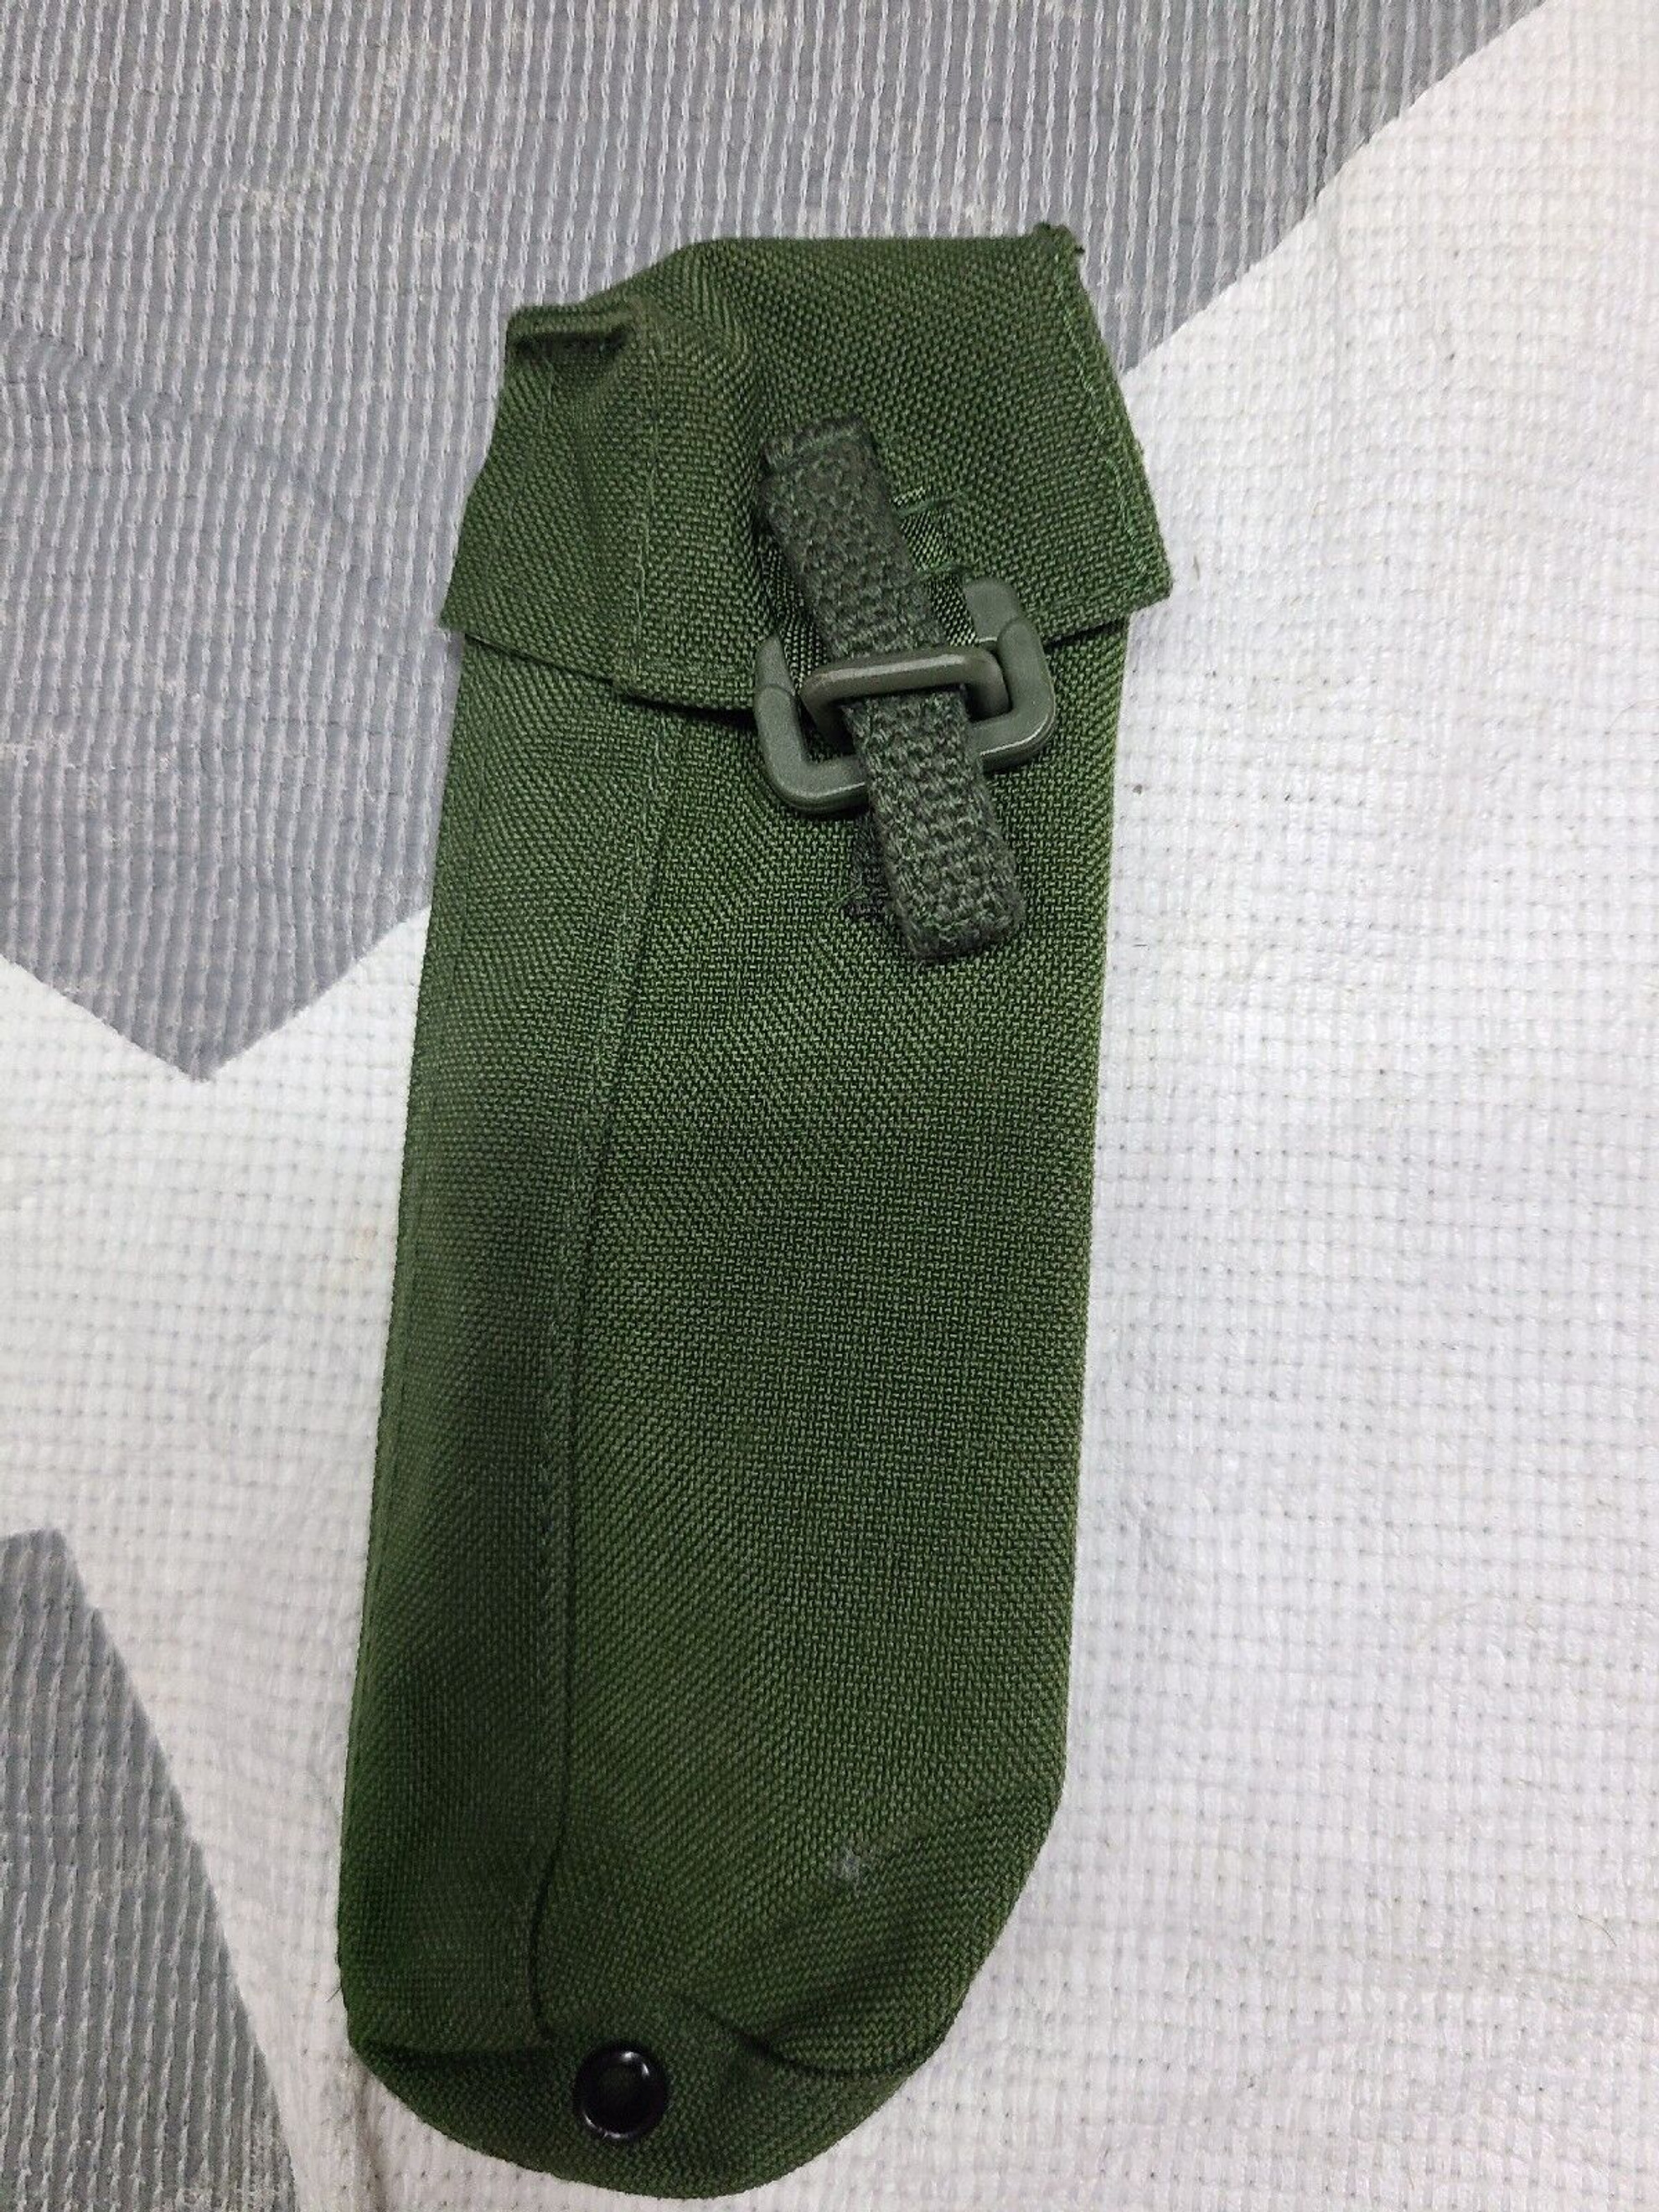 Canadian Armed Forces C8 Cleaning Kit Pouch